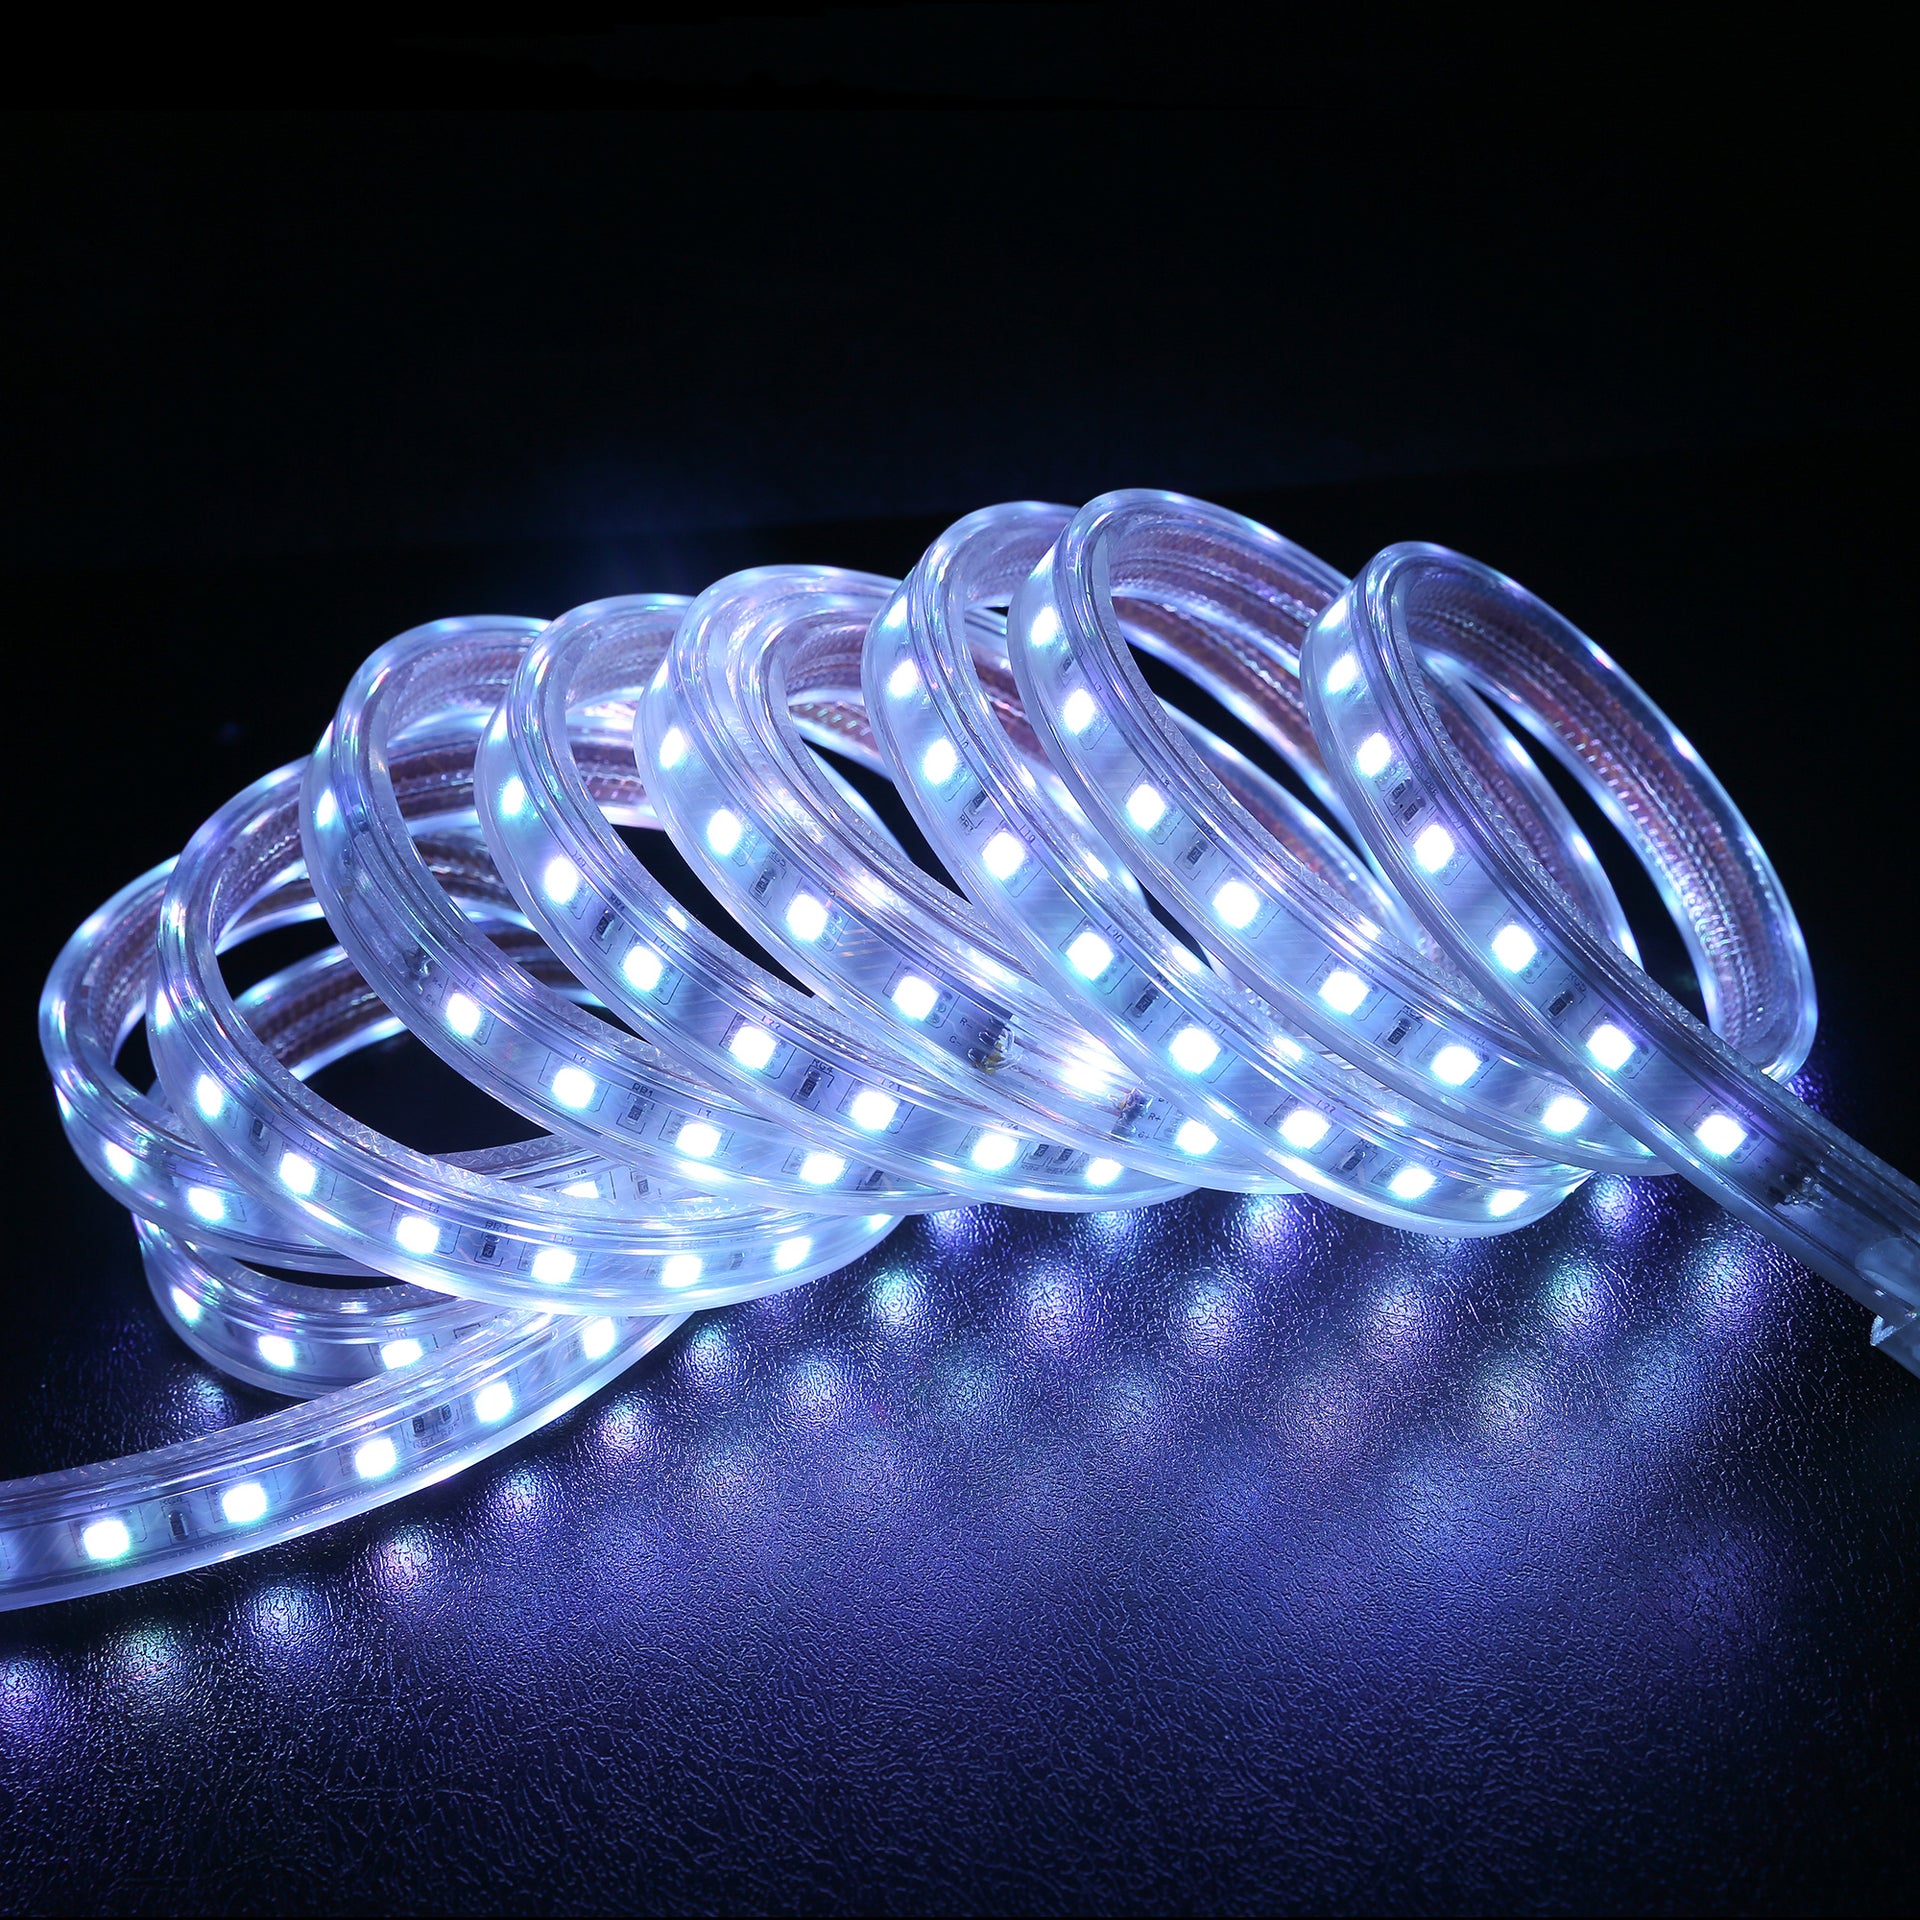 SMD 5050 LED Flexible Dimmable Indoor/Outdoor Light Strip (16 Colors) with Remote and LED Controller/IR Receiver - West Ivory LED Lighting 